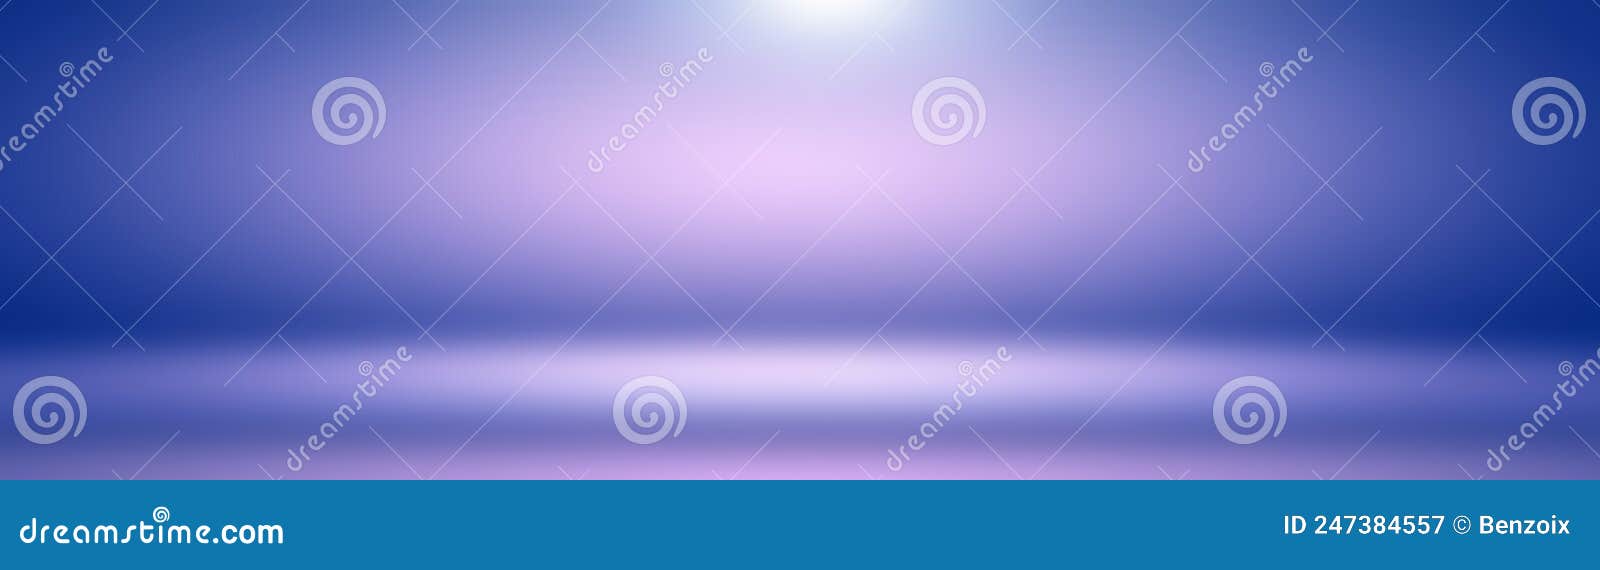 Studio Background Concept - Abstract Empty Light Gradient Purple Studio  Room Background for Product. Plain Studio Stock Image - Image of  decoration, blank: 247384557